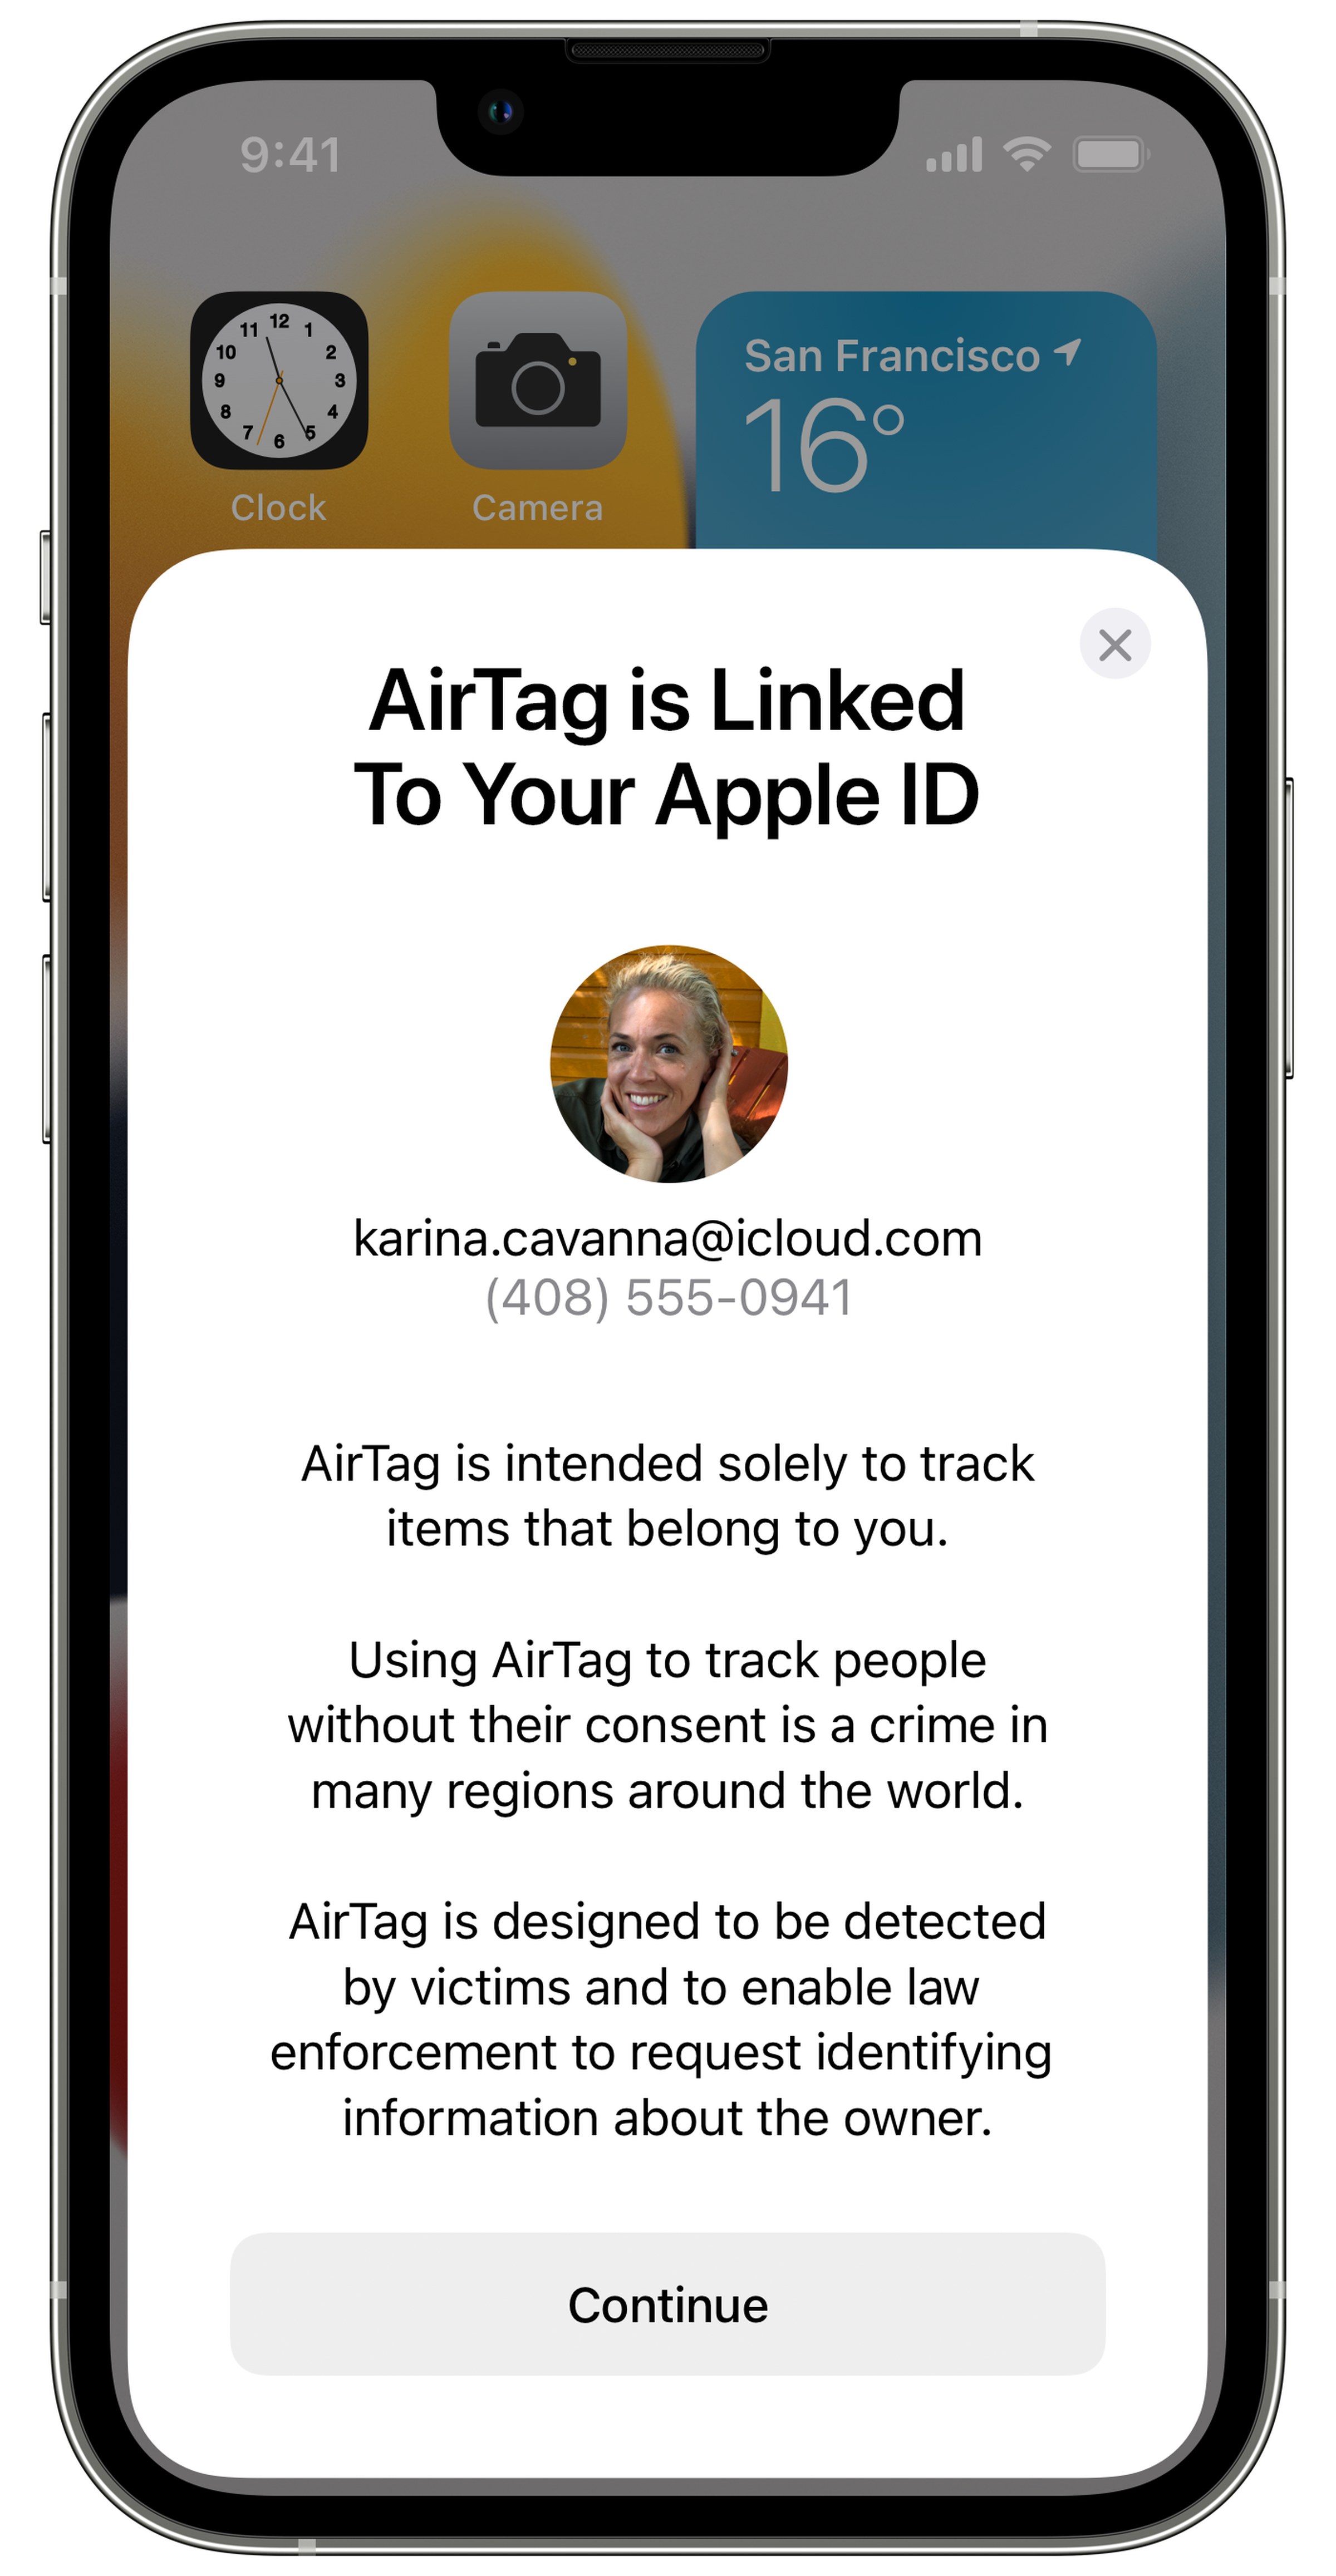 Apple will include a more specific privacy notice when setting up AirTags.